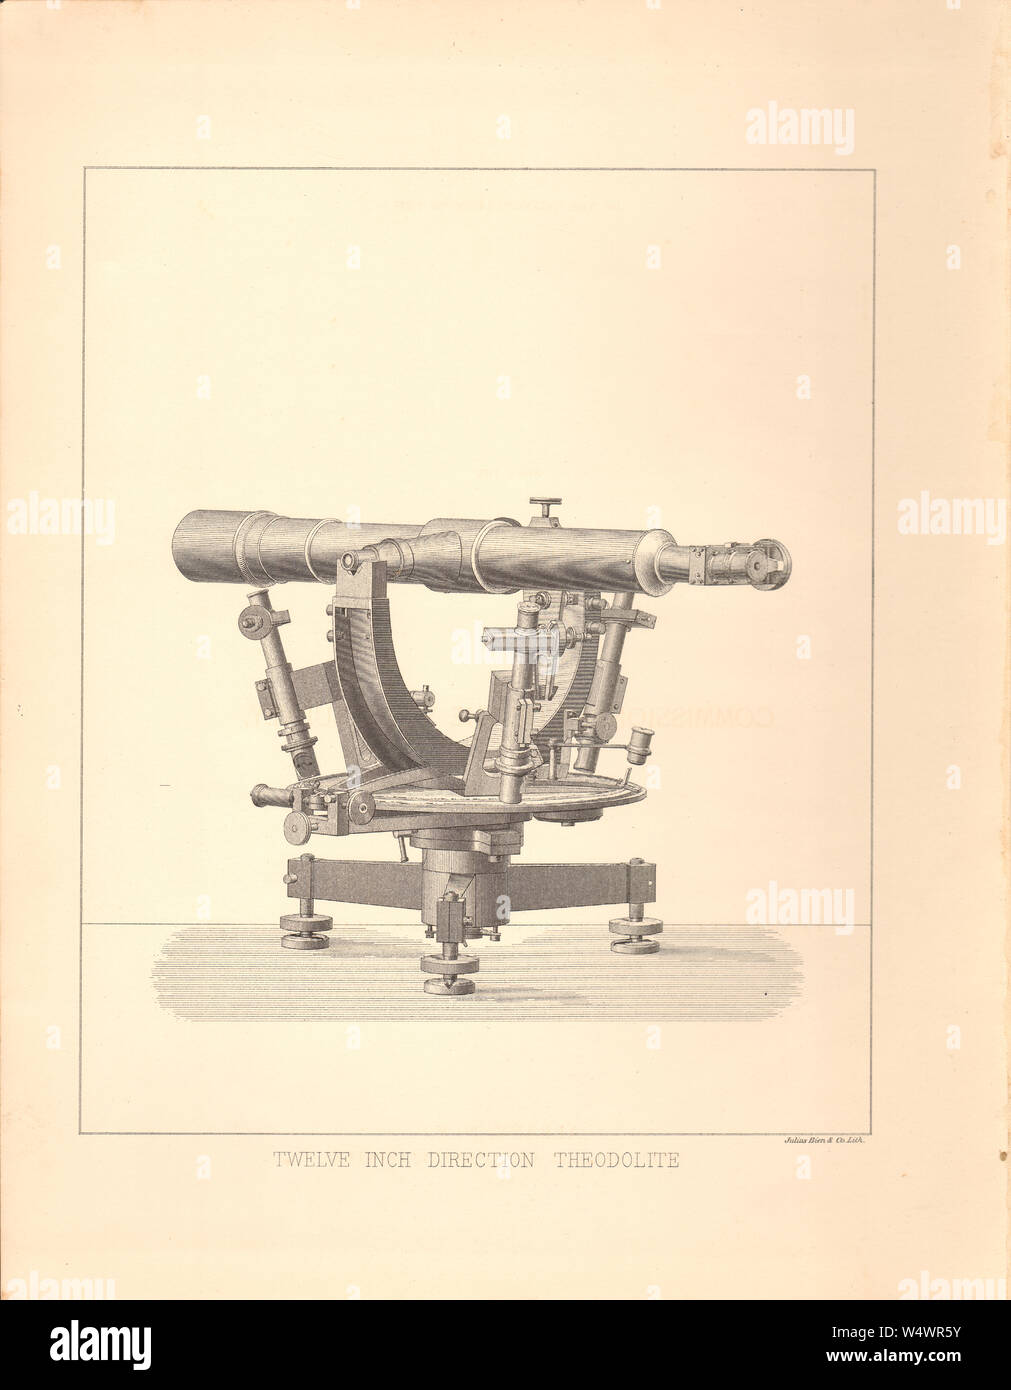 Twelve-inch Direction Theodolite - Antiquarian bookplate from a set of plates showing 19th century survey tools in a NY State Survey Report Stock Photo